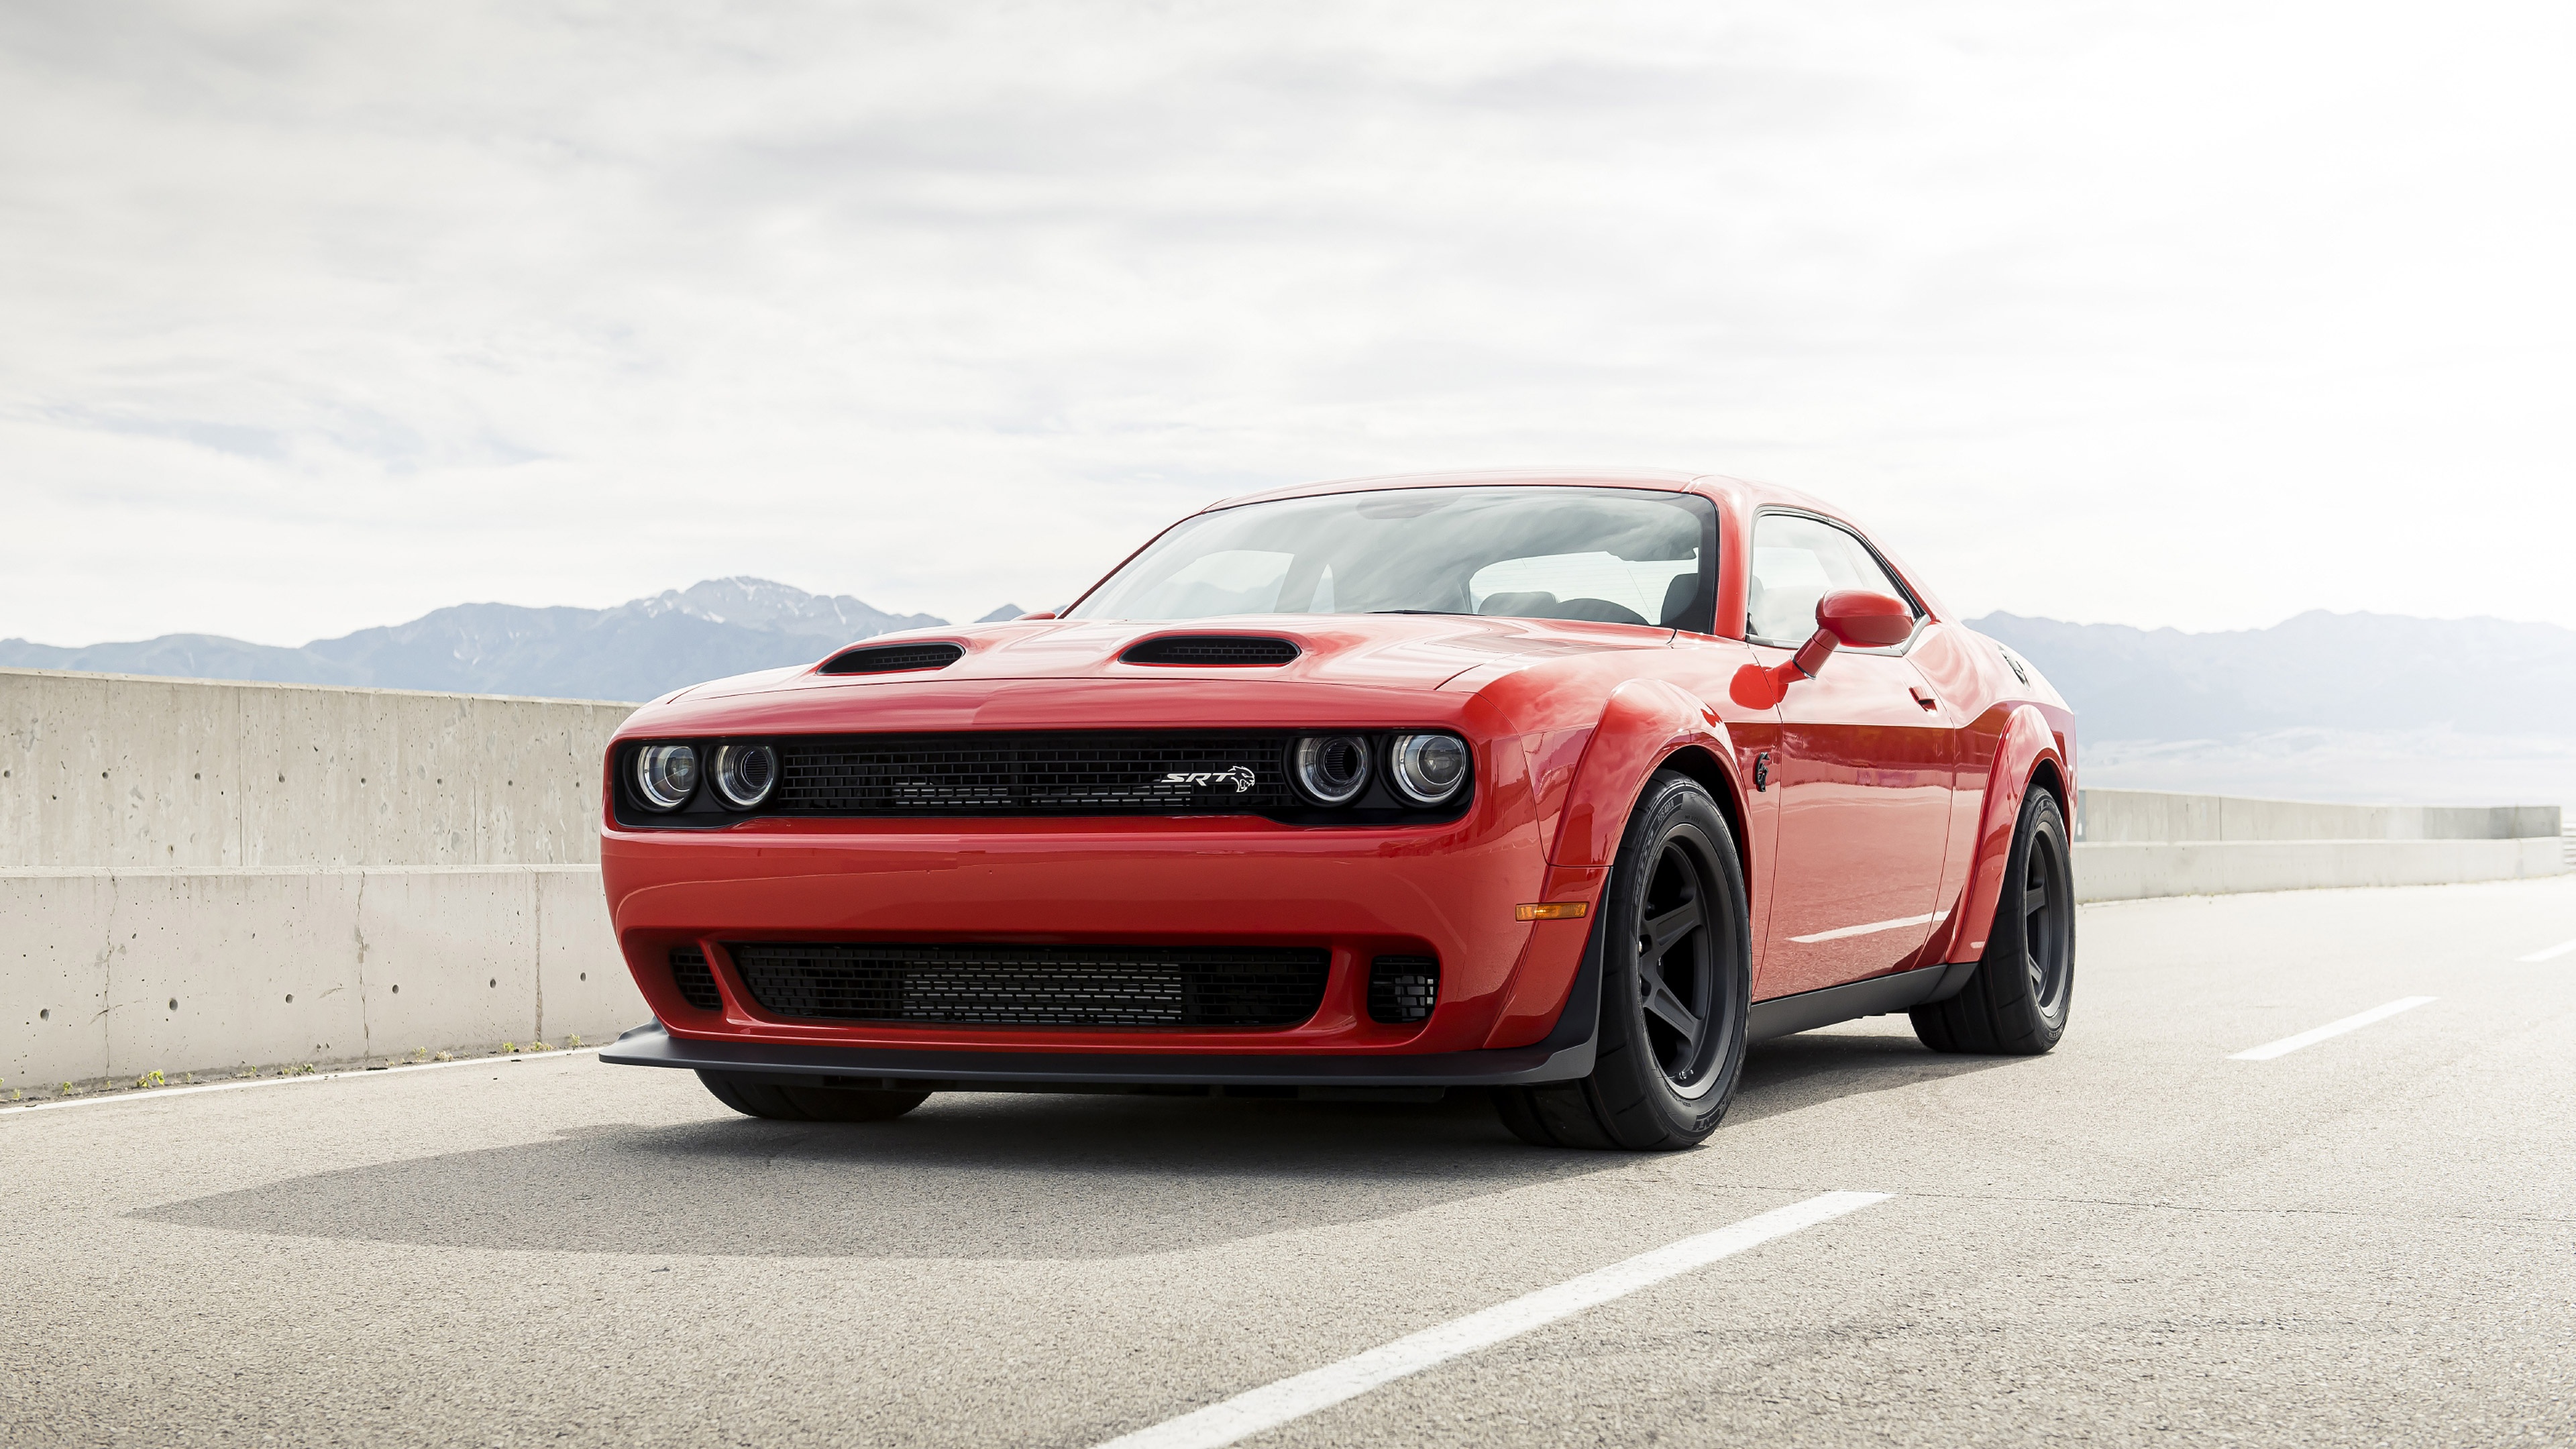 Dodge Challenger Srt Dodge Challenger Dodge Car Red Car Muscle Car 3840x2160